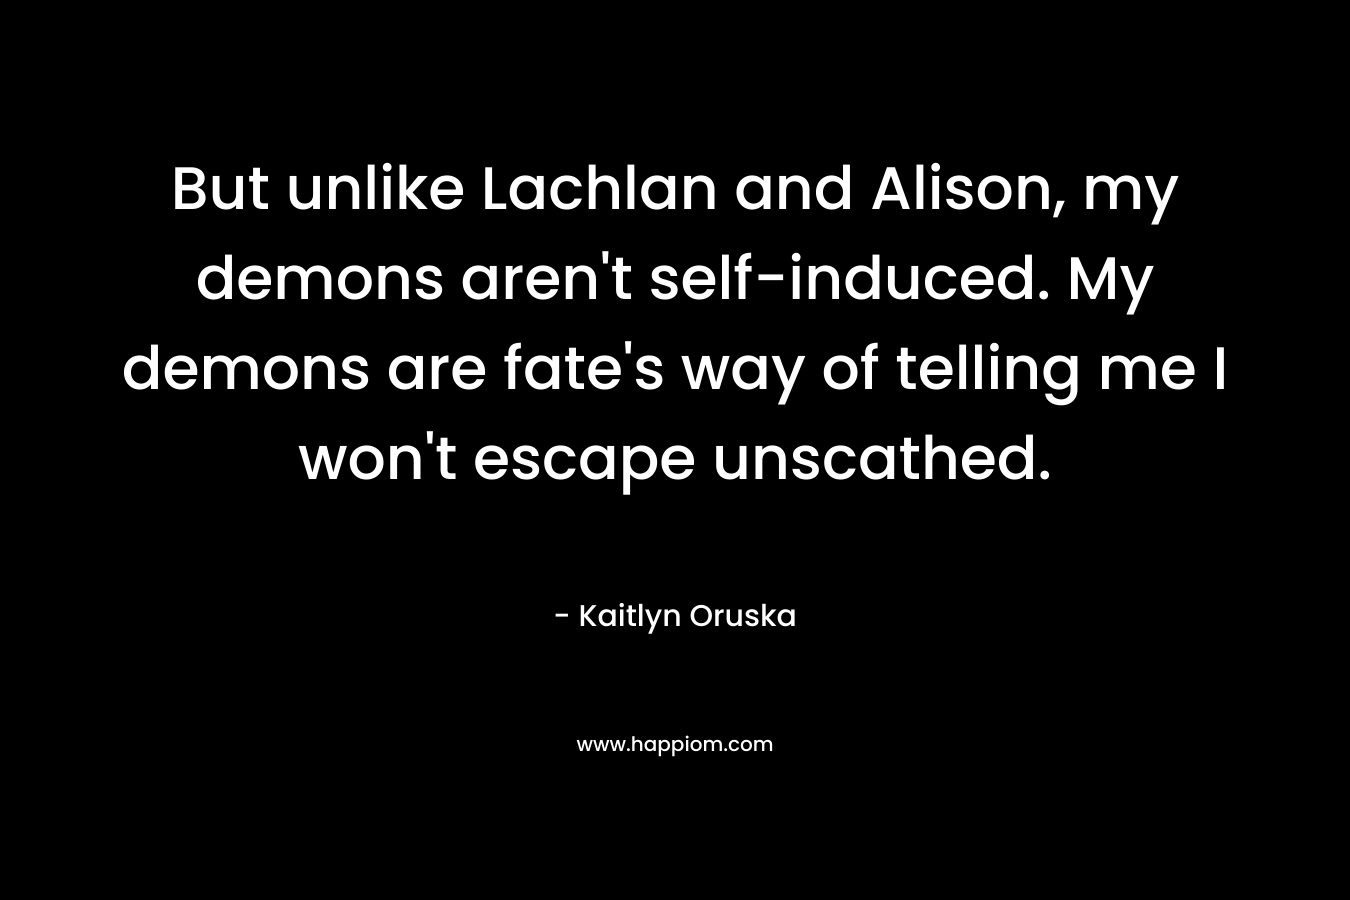 But unlike Lachlan and Alison, my demons aren’t self-induced. My demons are fate’s way of telling me I won’t escape unscathed. – Kaitlyn Oruska